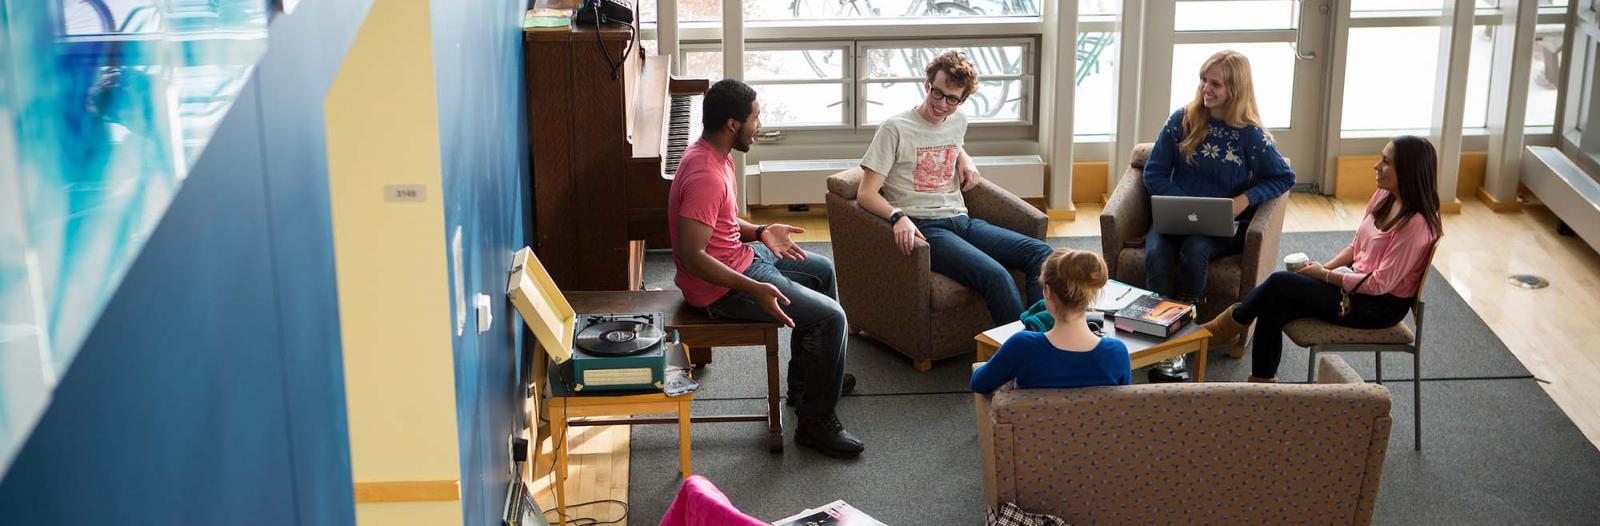 Students in common area of residence hall